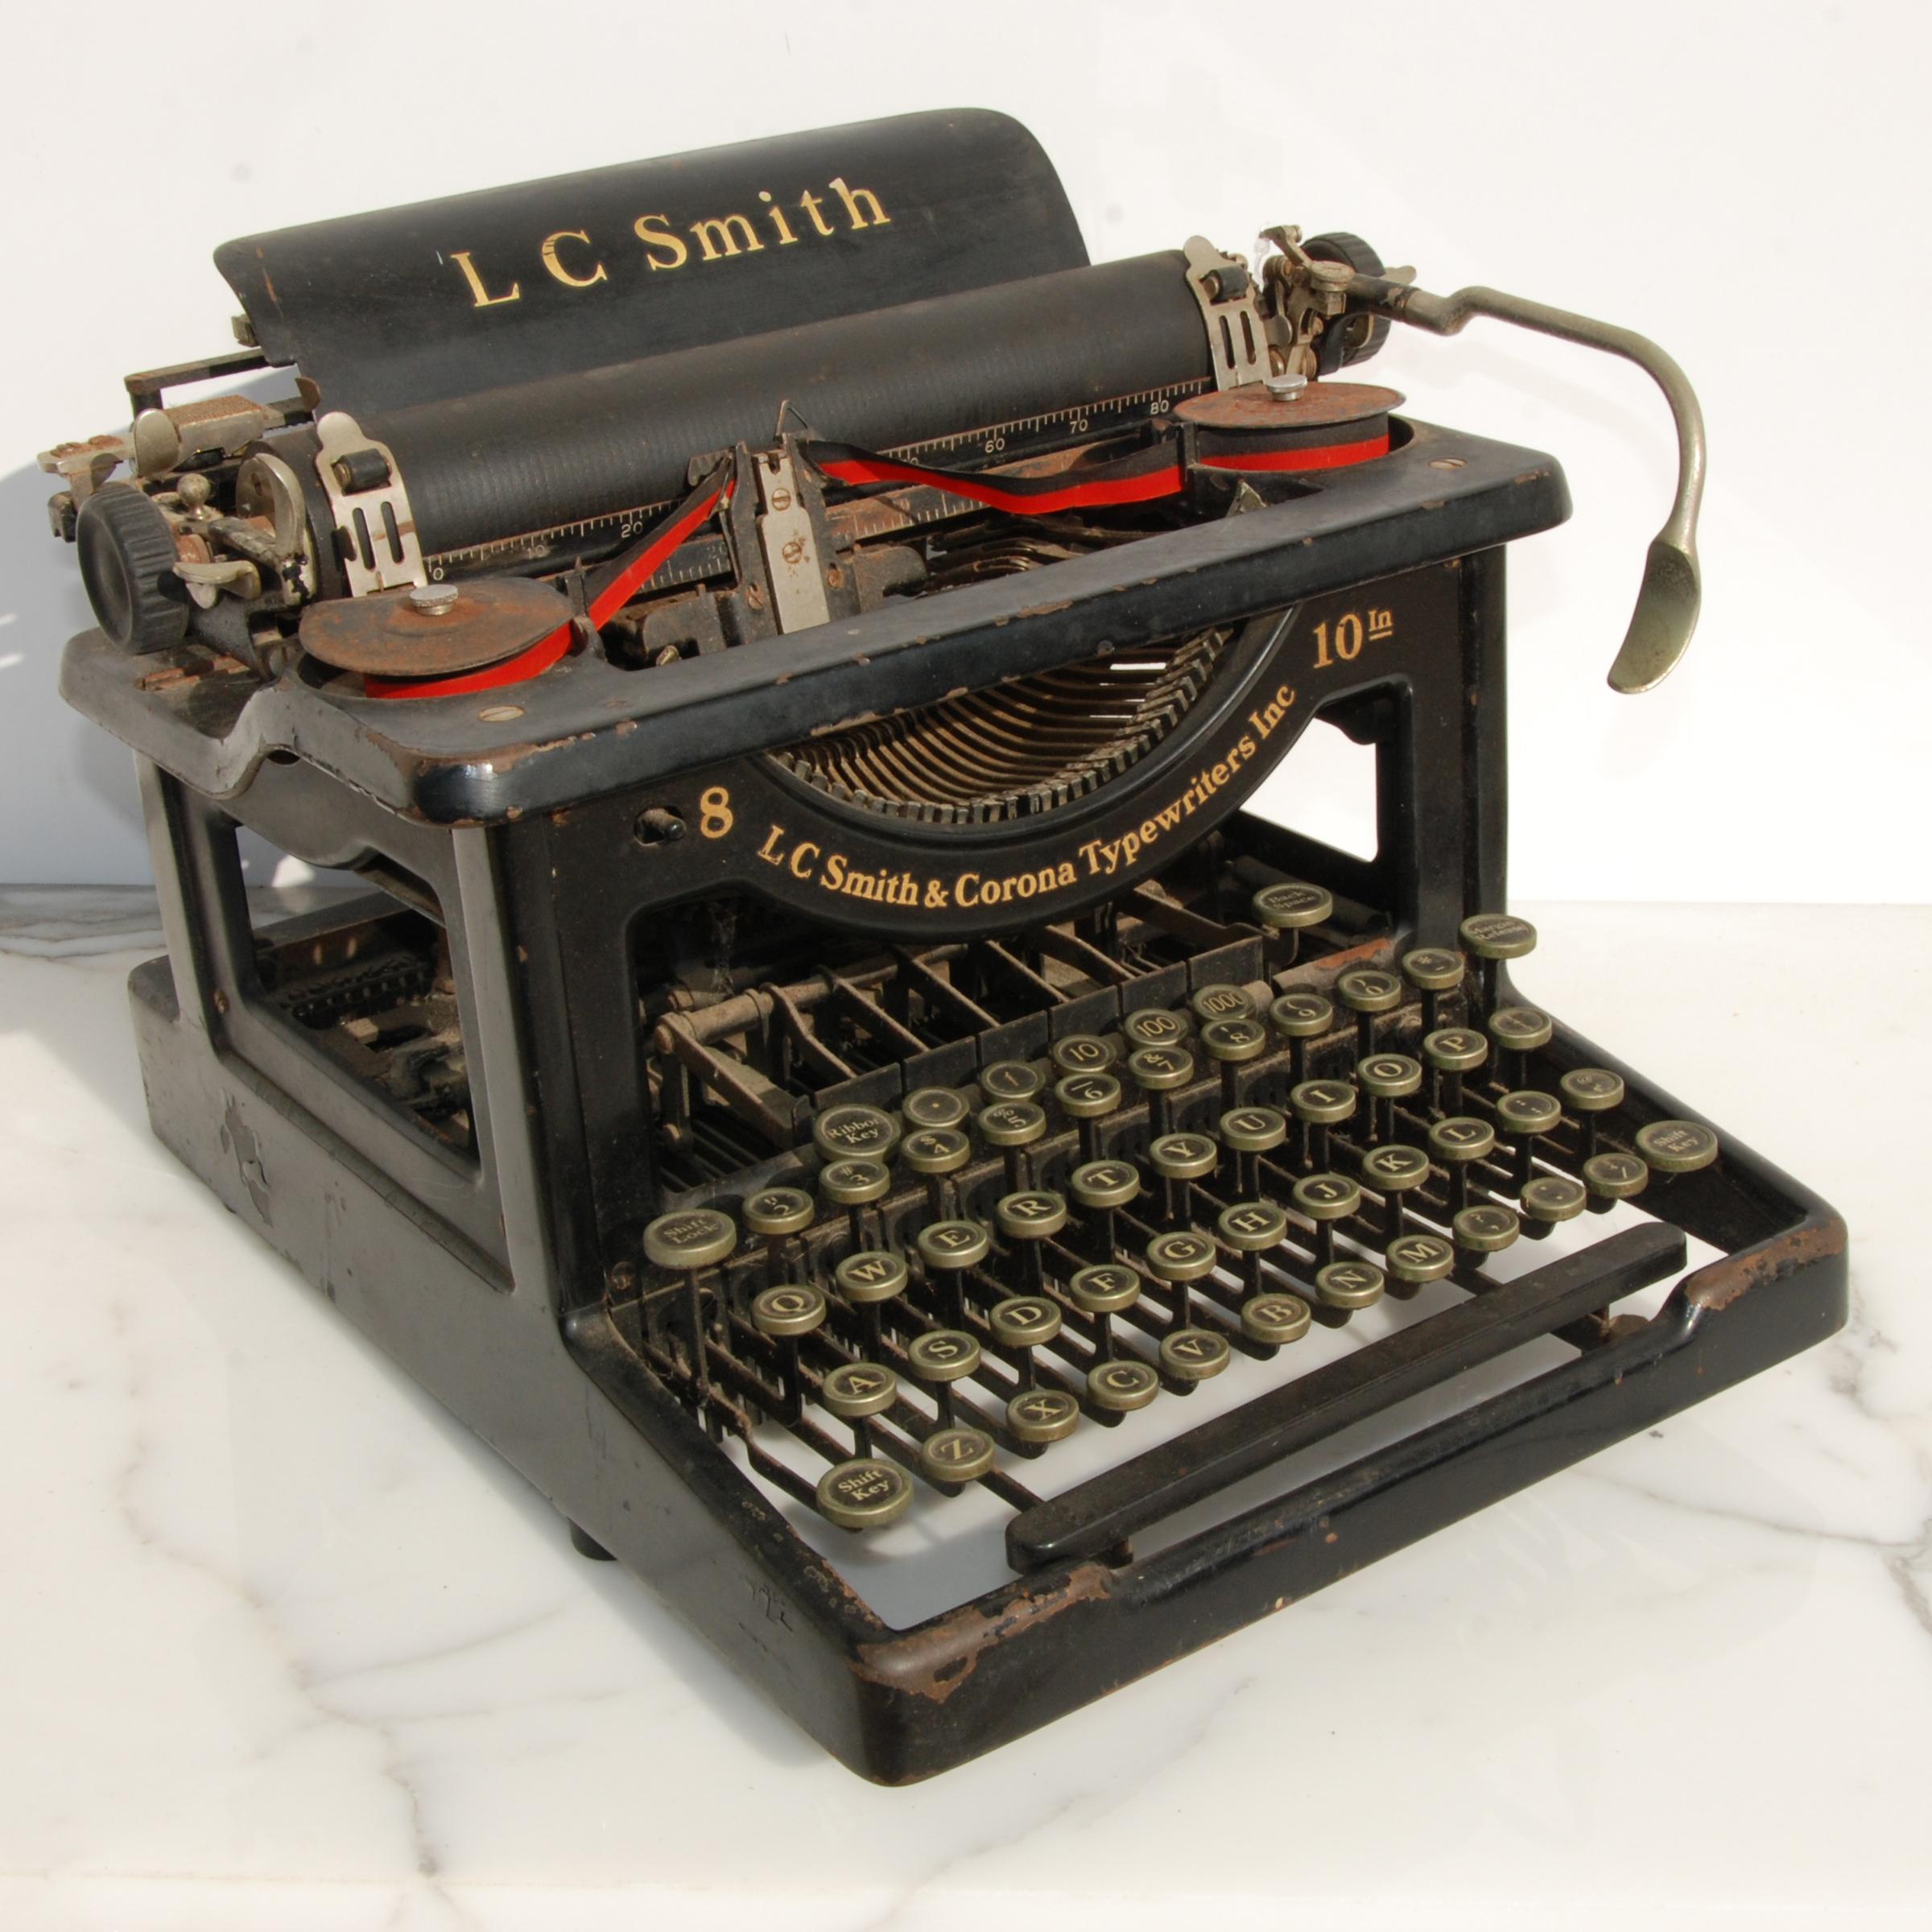 This is an original LC Smith & Corona Typewriter #8 10 with a 10 inch carriage and an open-frame design. The keys are nickel with white face and black numbers. Four rows of keys with a top row of decimals. Keys stick slightly, but can still be typed